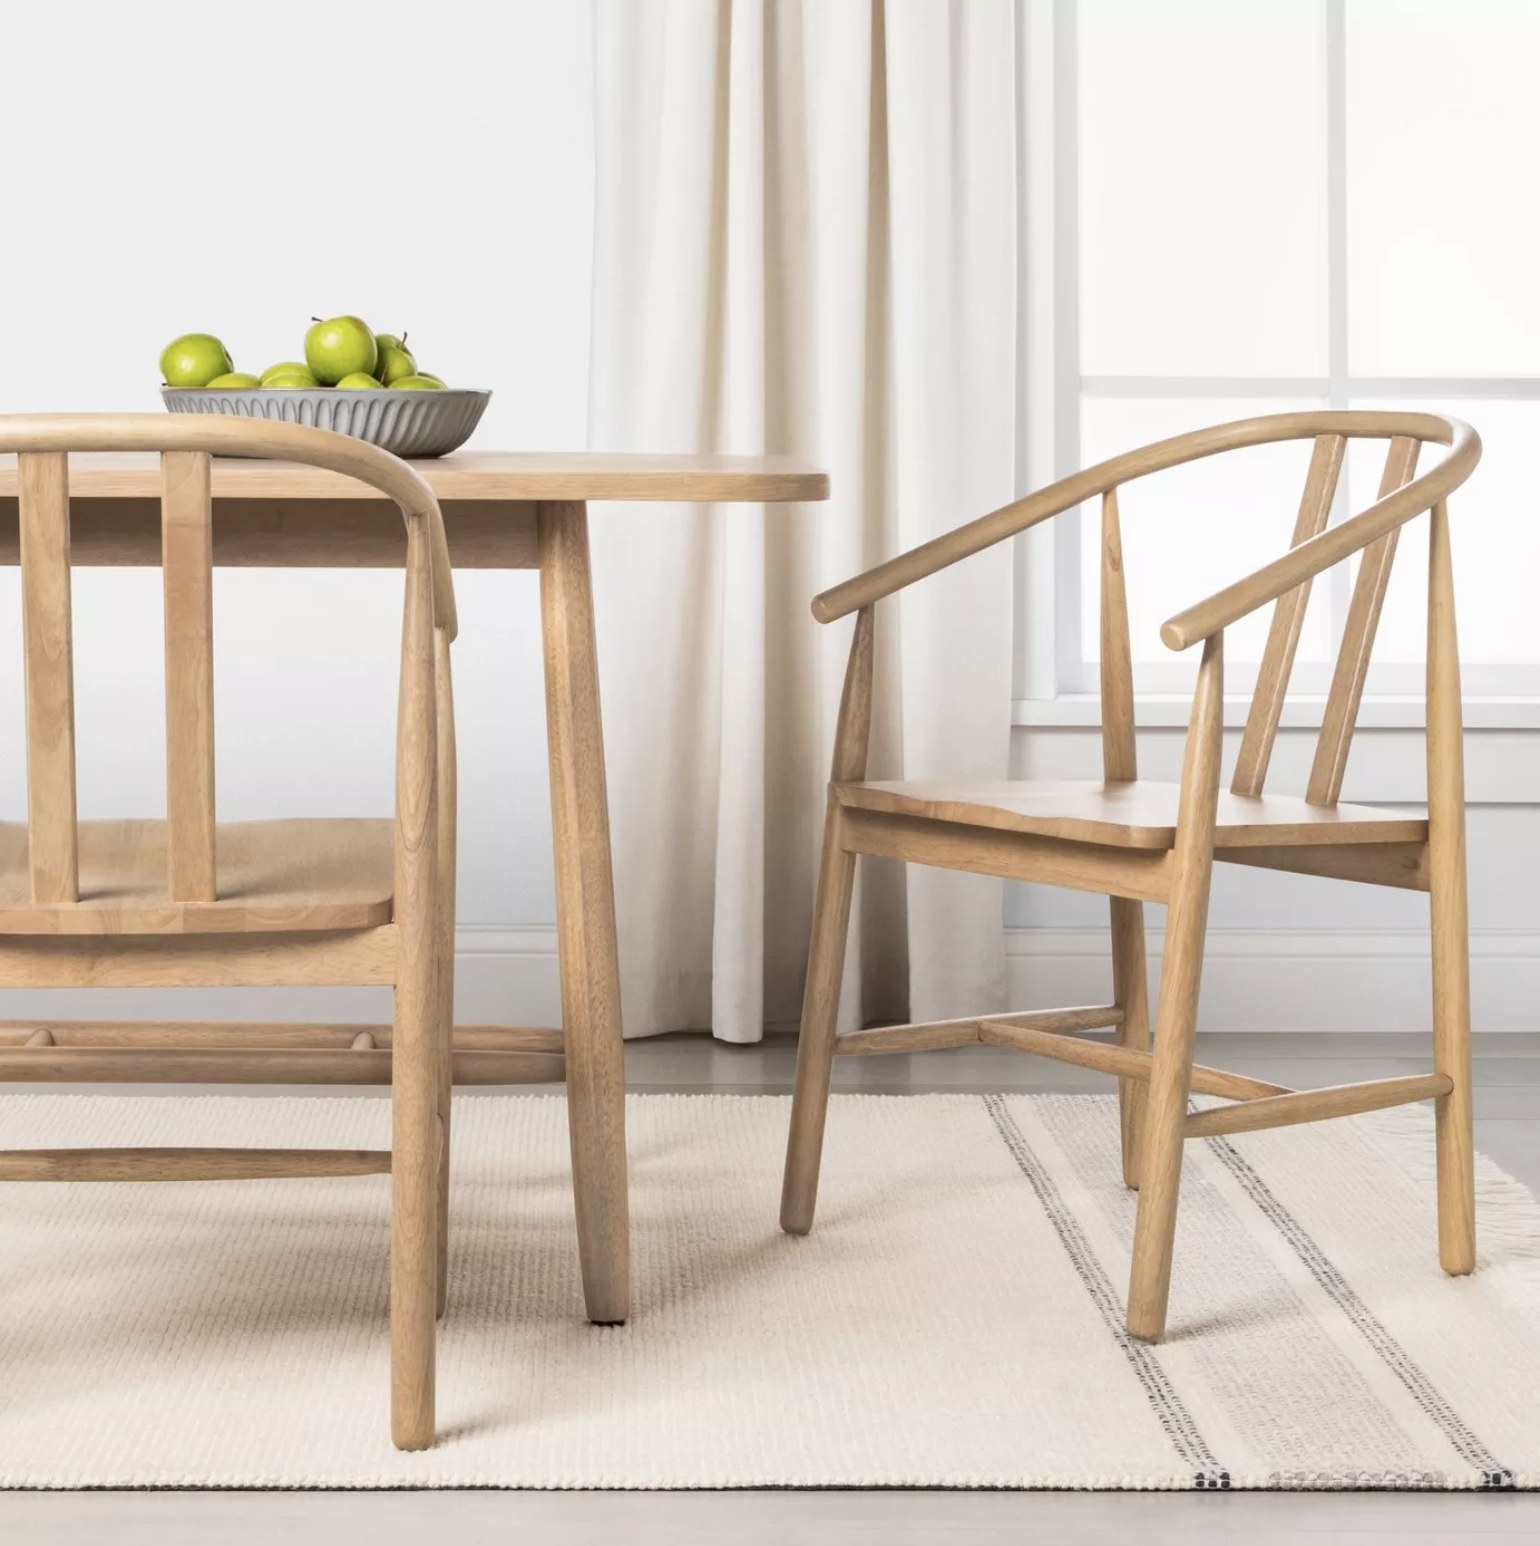 The wood chair in a dining room